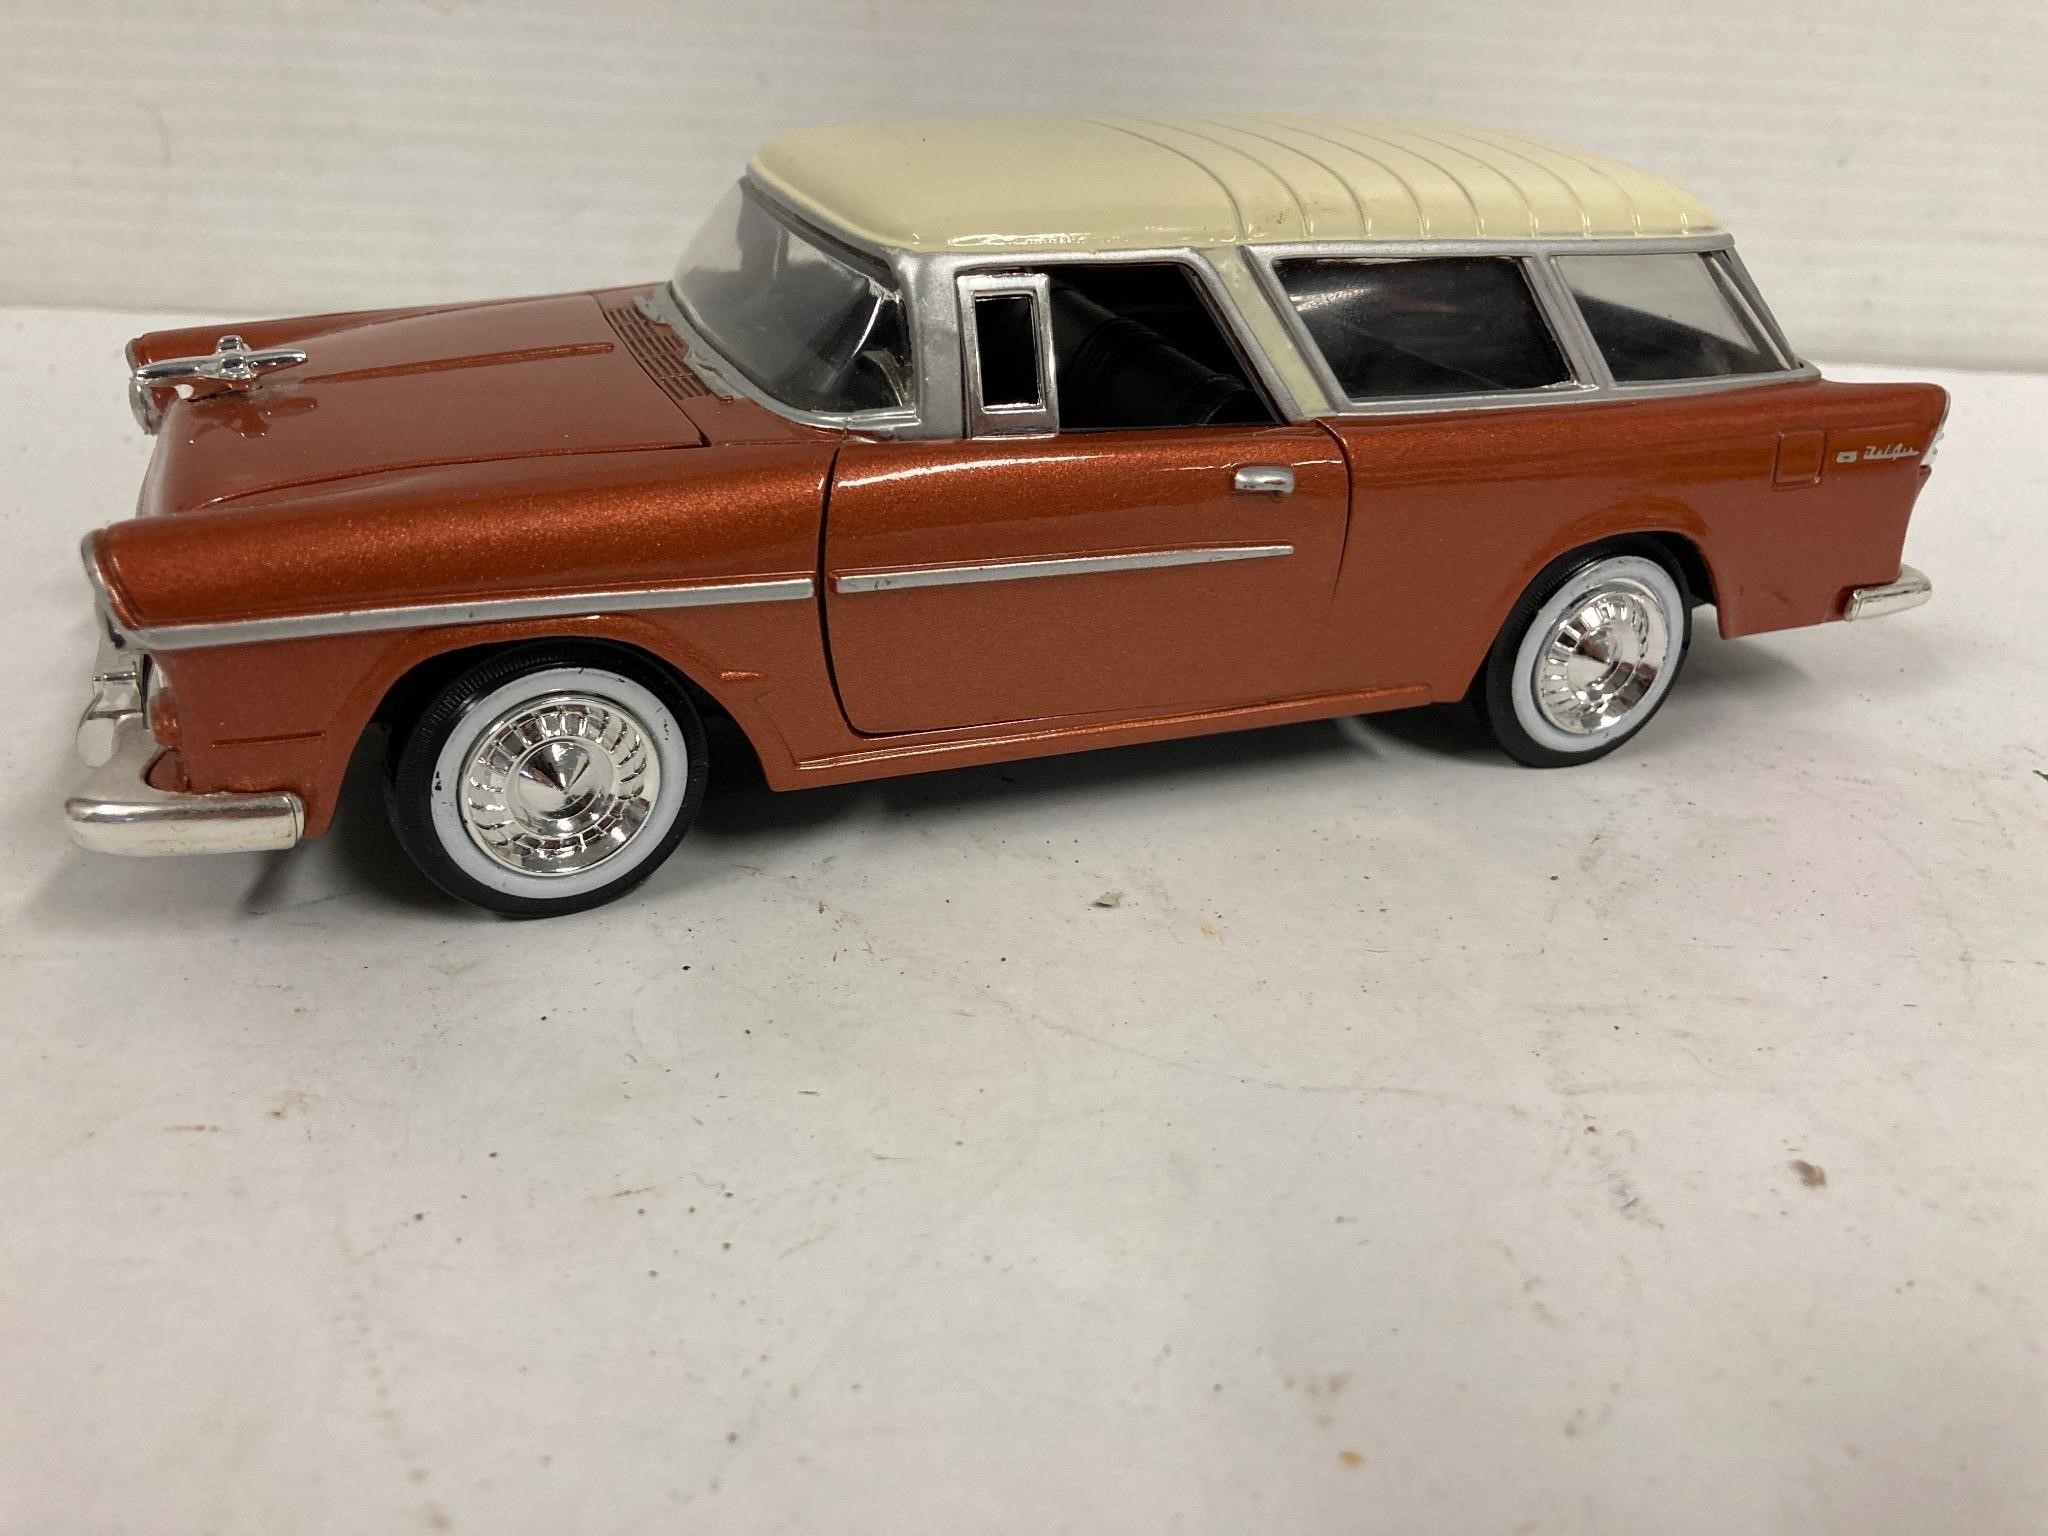 Chevy Nomad wagon. 1955. 1:24 scale